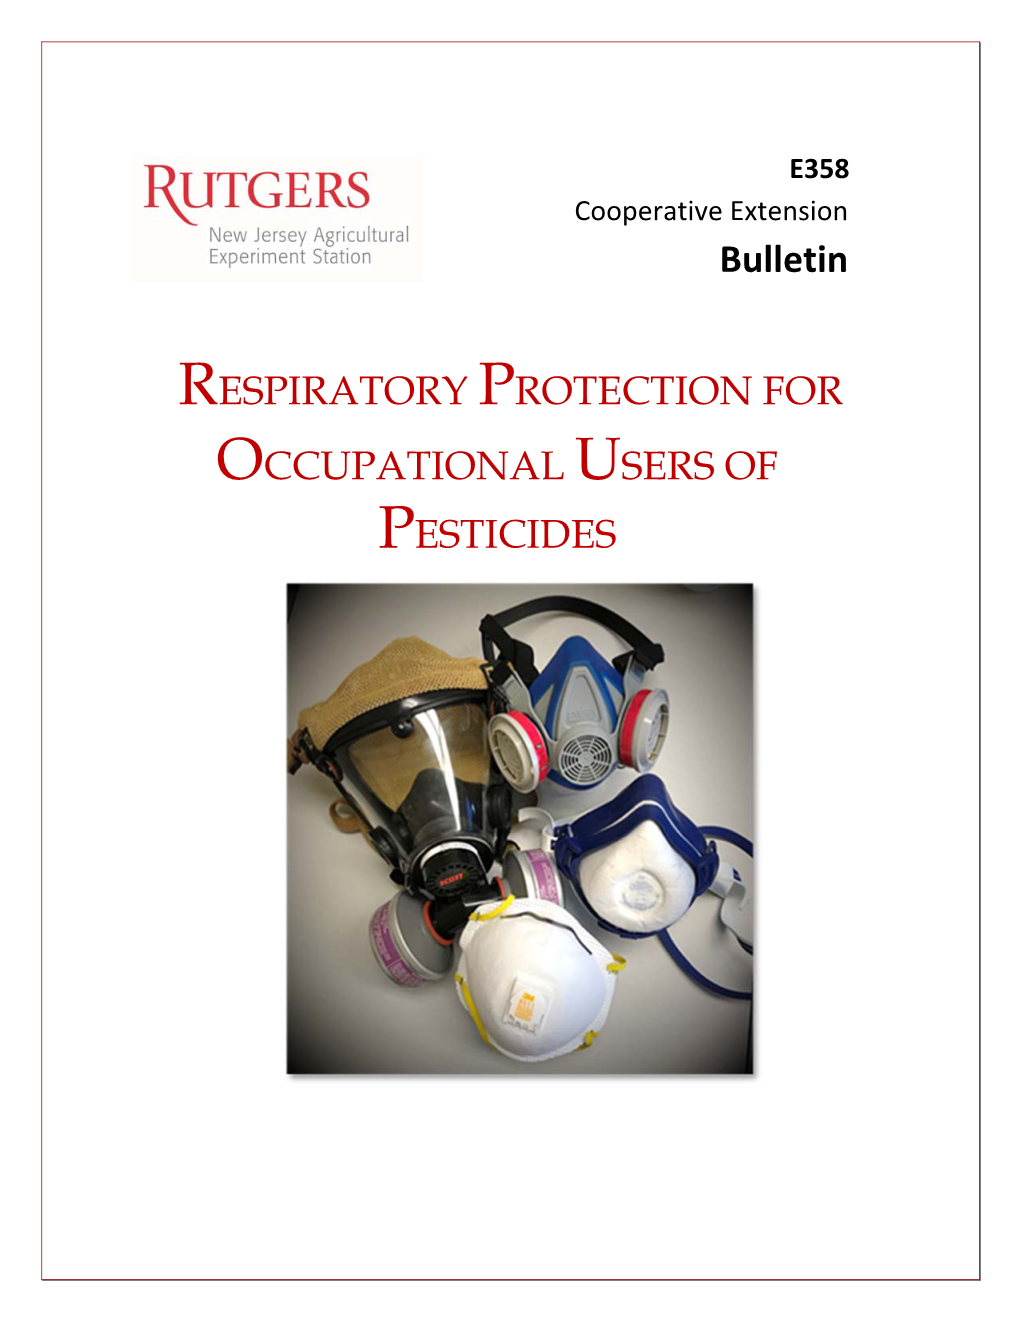 Respiratory Protection for Occupational Users of Pesticides